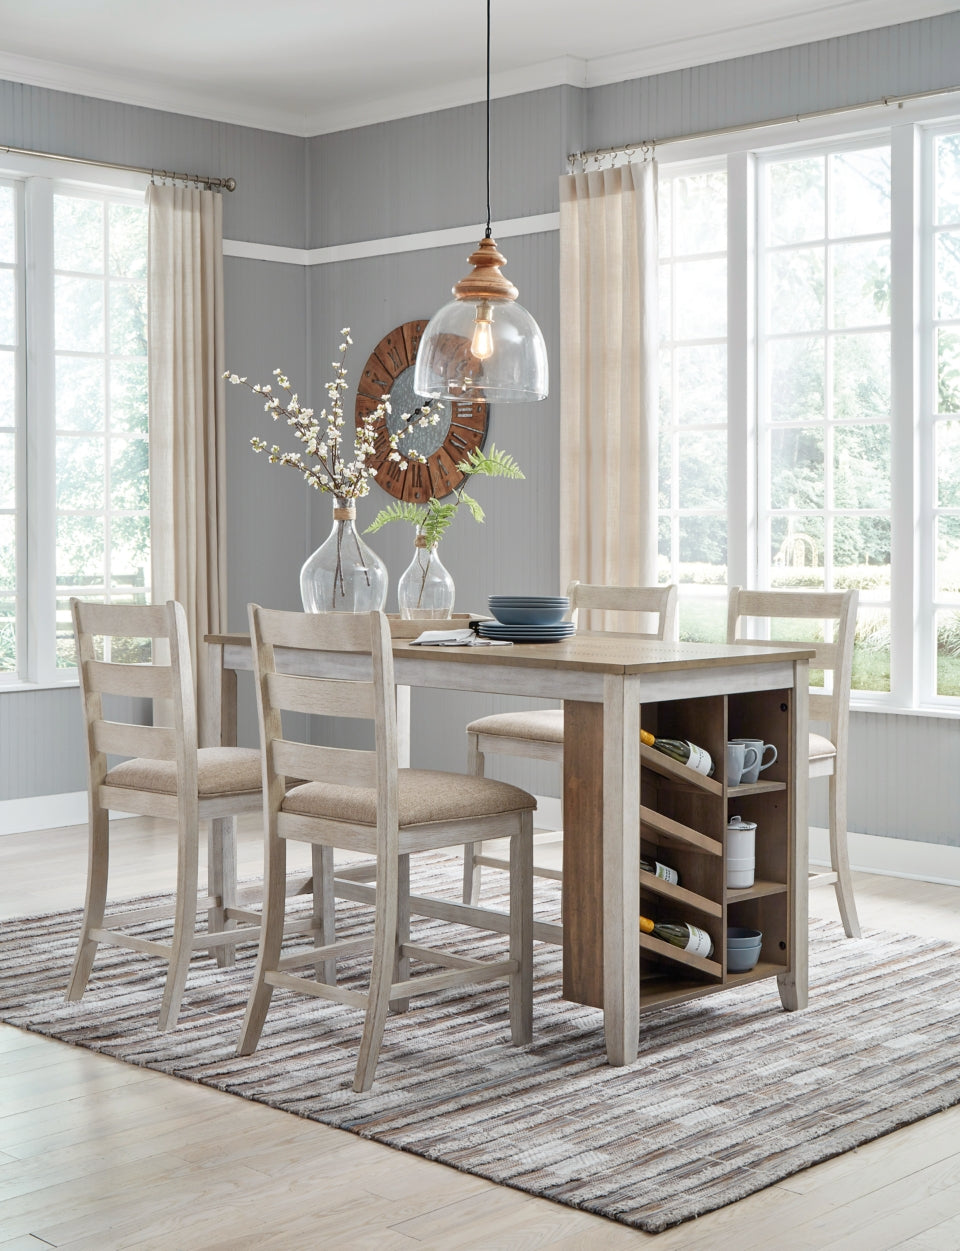 Skempton Counter Height Dining Table and 4 Barstools - PKG001971 - furniture place usa